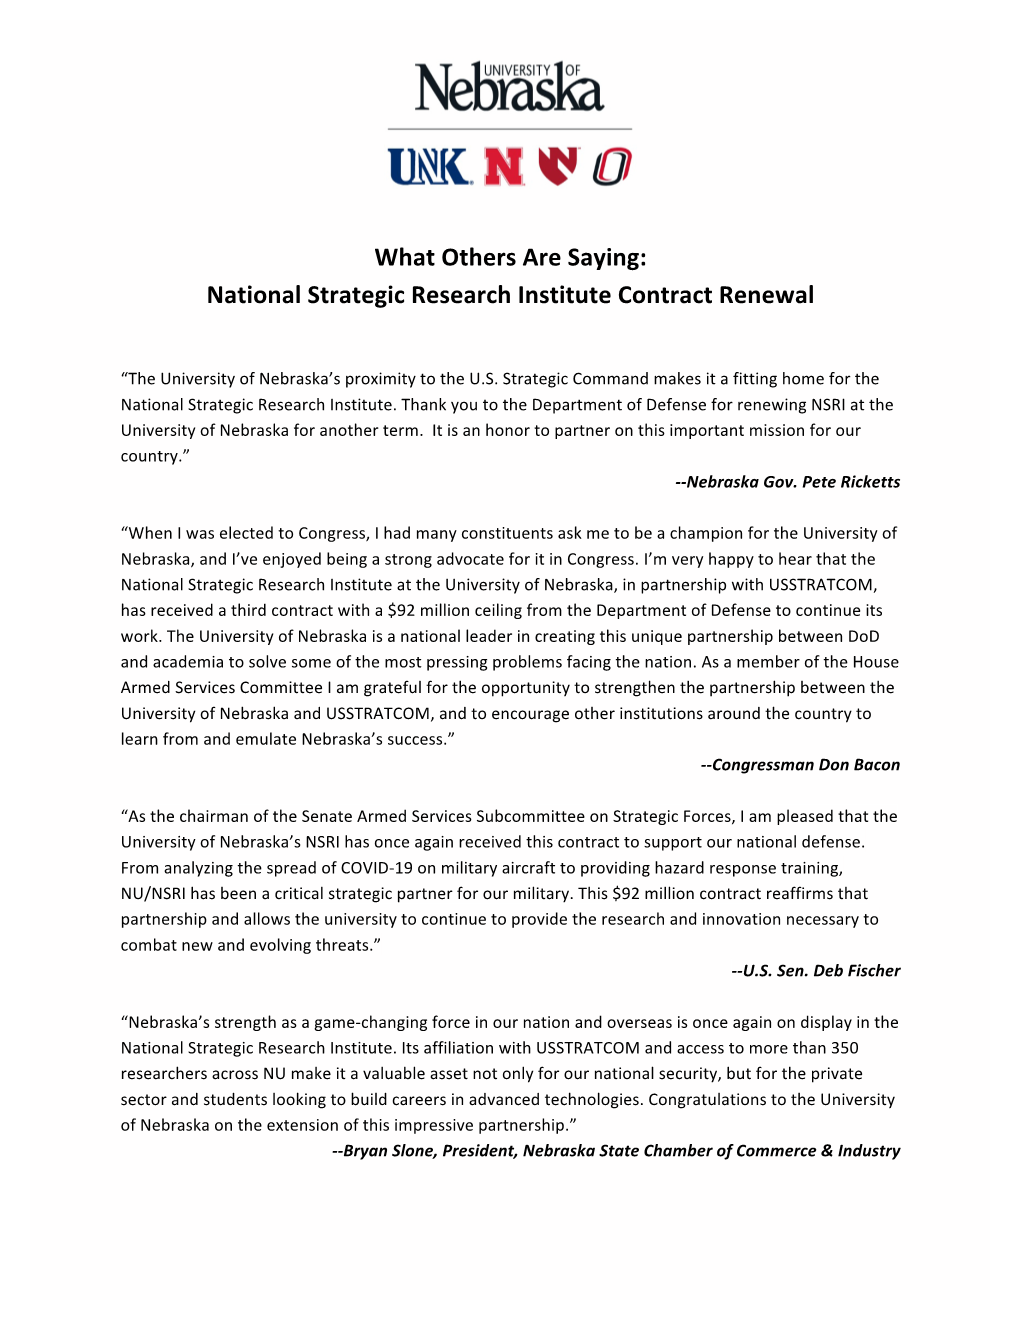 What Others Are Saying: National Strategic Research Institute Contract Renewal